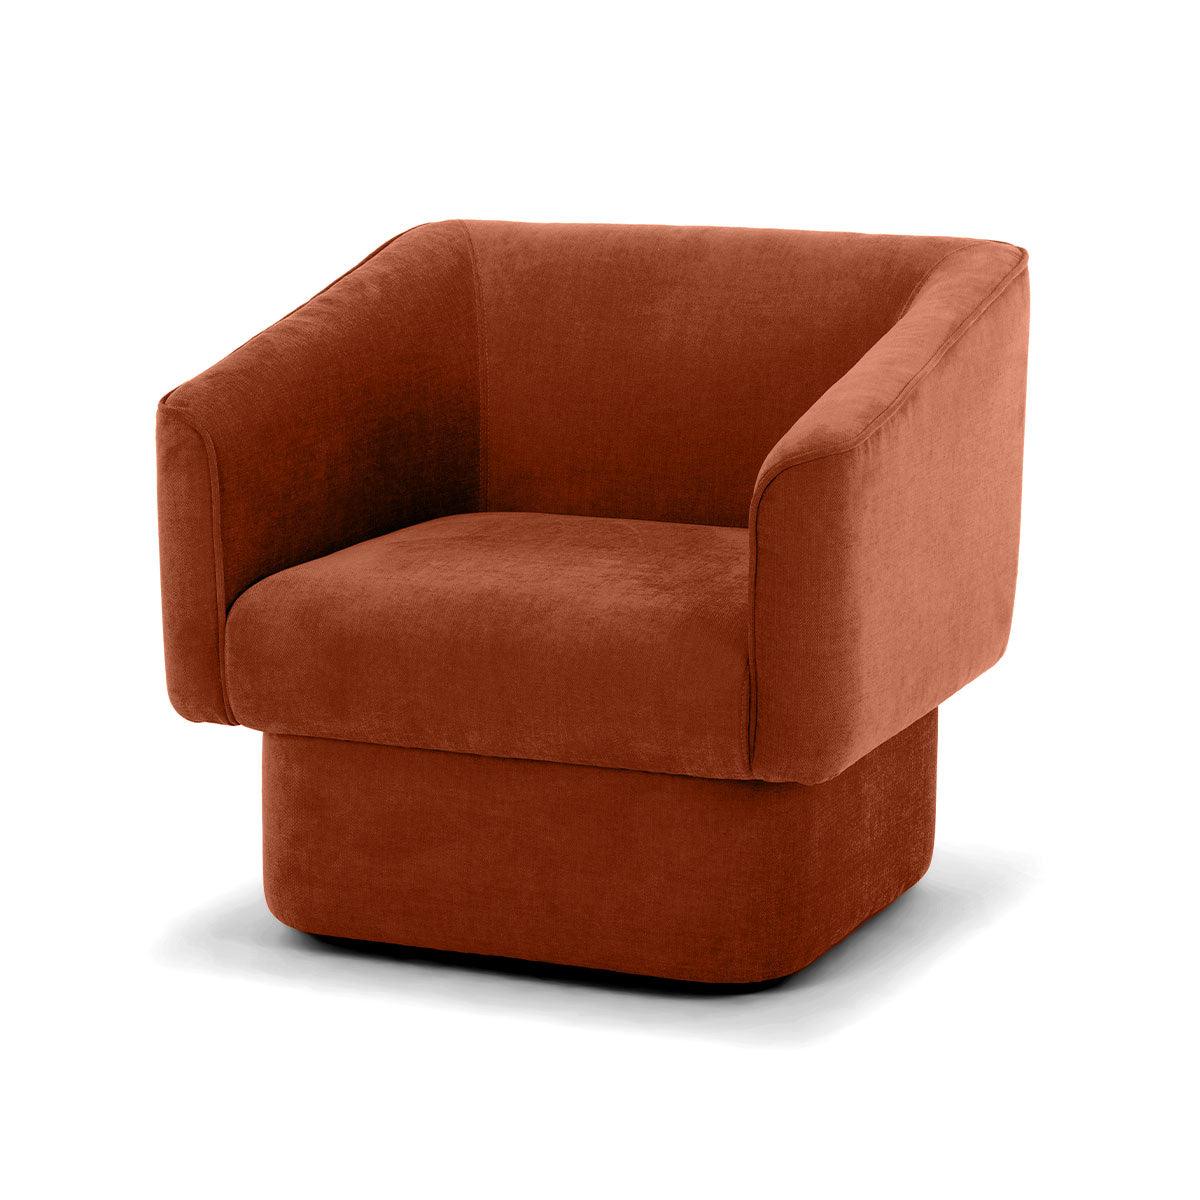 Marmont Swivel Arm Chair - Pigeon - The Family Love Tree